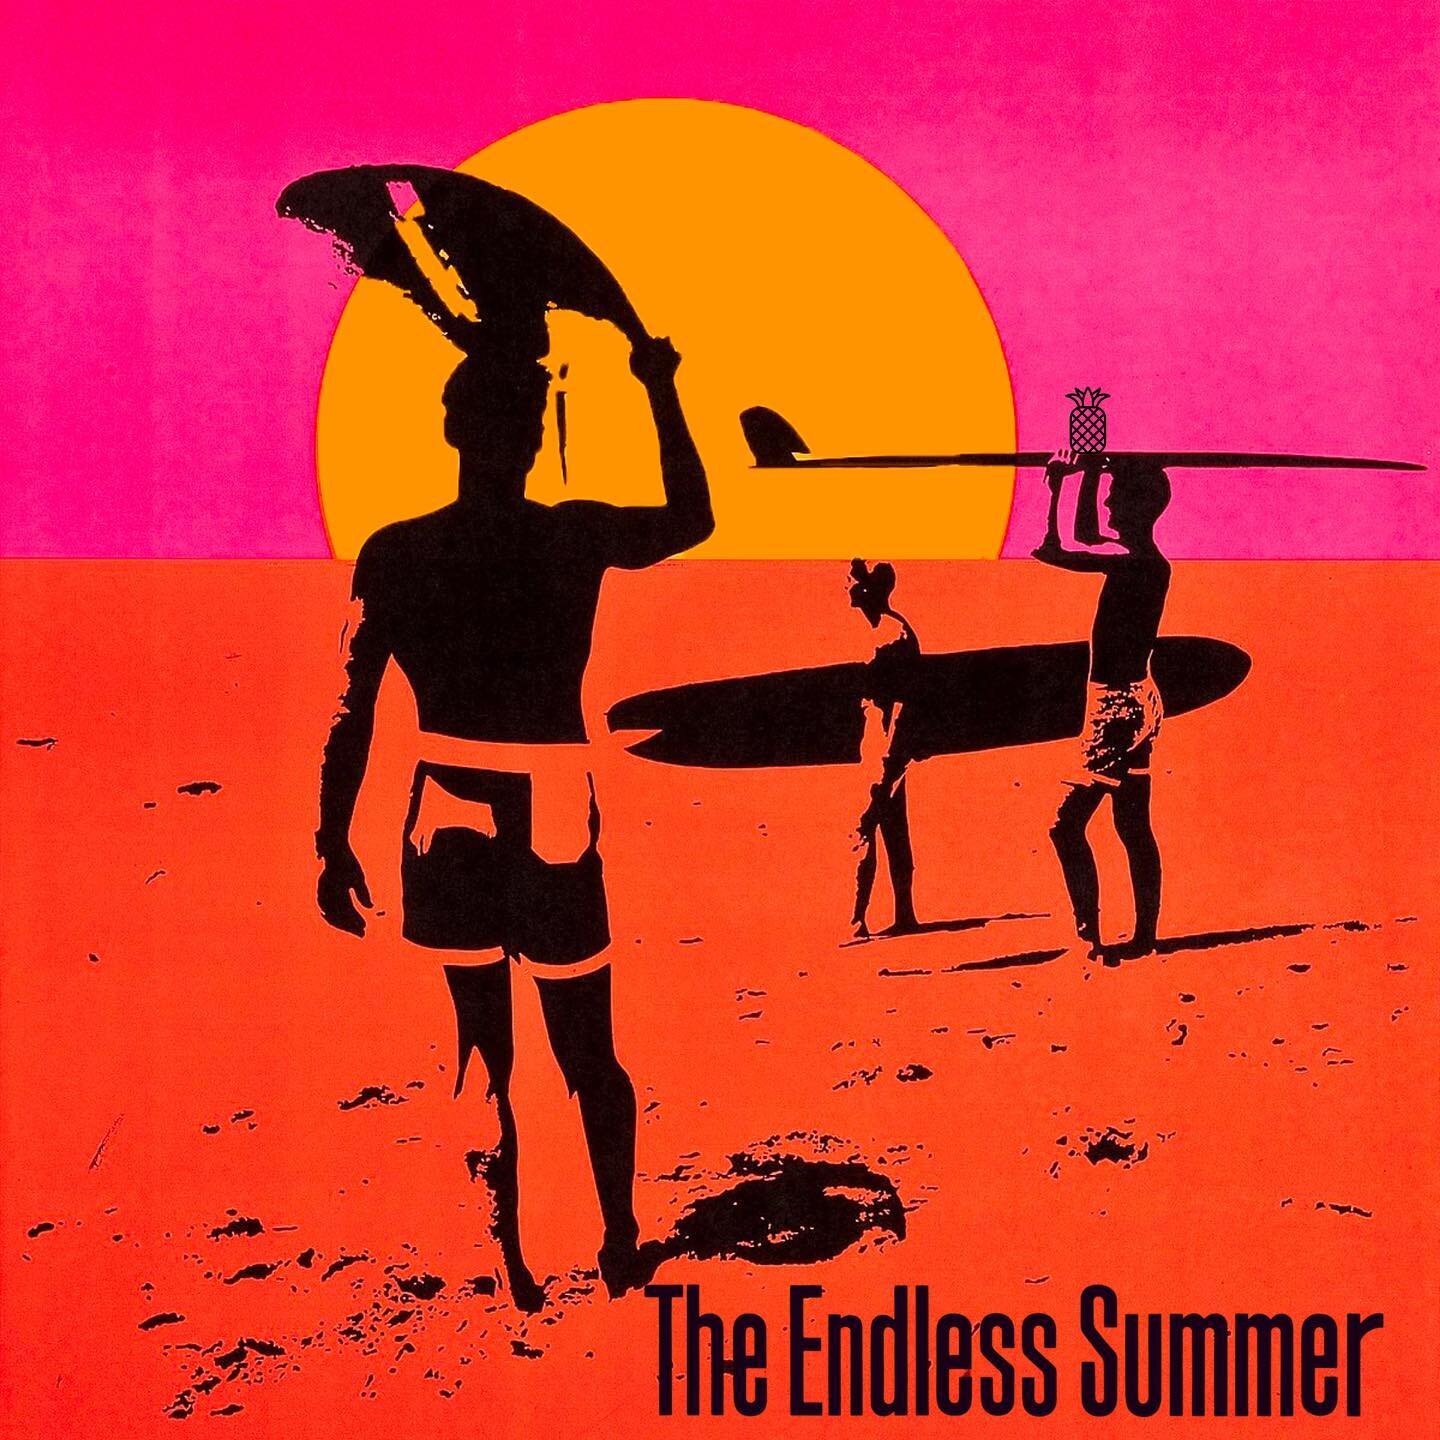 Ahhh &ldquo;The Endless Summer&rdquo; 🍿 the never ending journey from beach to beach, chasing the season from sunrise to sunset. This is our favorite movie and it follows two surfers as they travel around the world chasing the Summer Sun 🎬 🗺️ ☀️. 